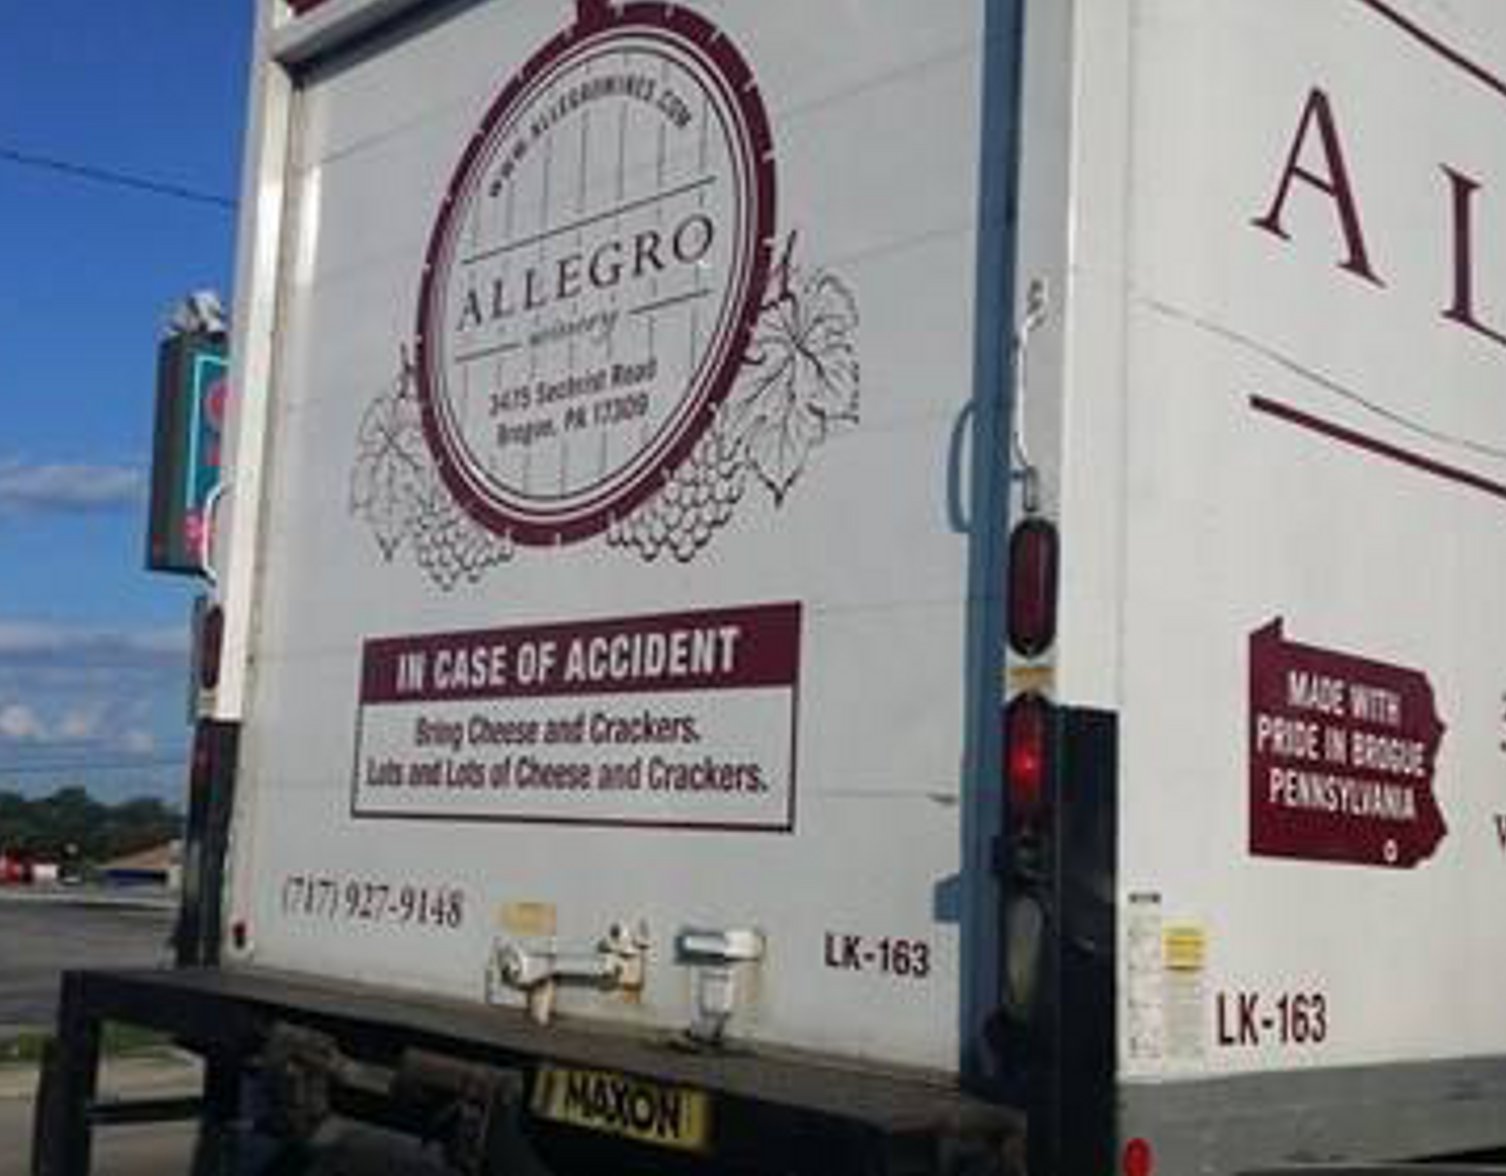 wine truck in case of accident - Allegro 1215 Seleb Toot In Case Of Accident Videt Sep Cheese and Crackers Laluand les of Cheese and Crackers. Pode Pennsyudani 2177917.9148 Lk163 Lk163 Inoxoni